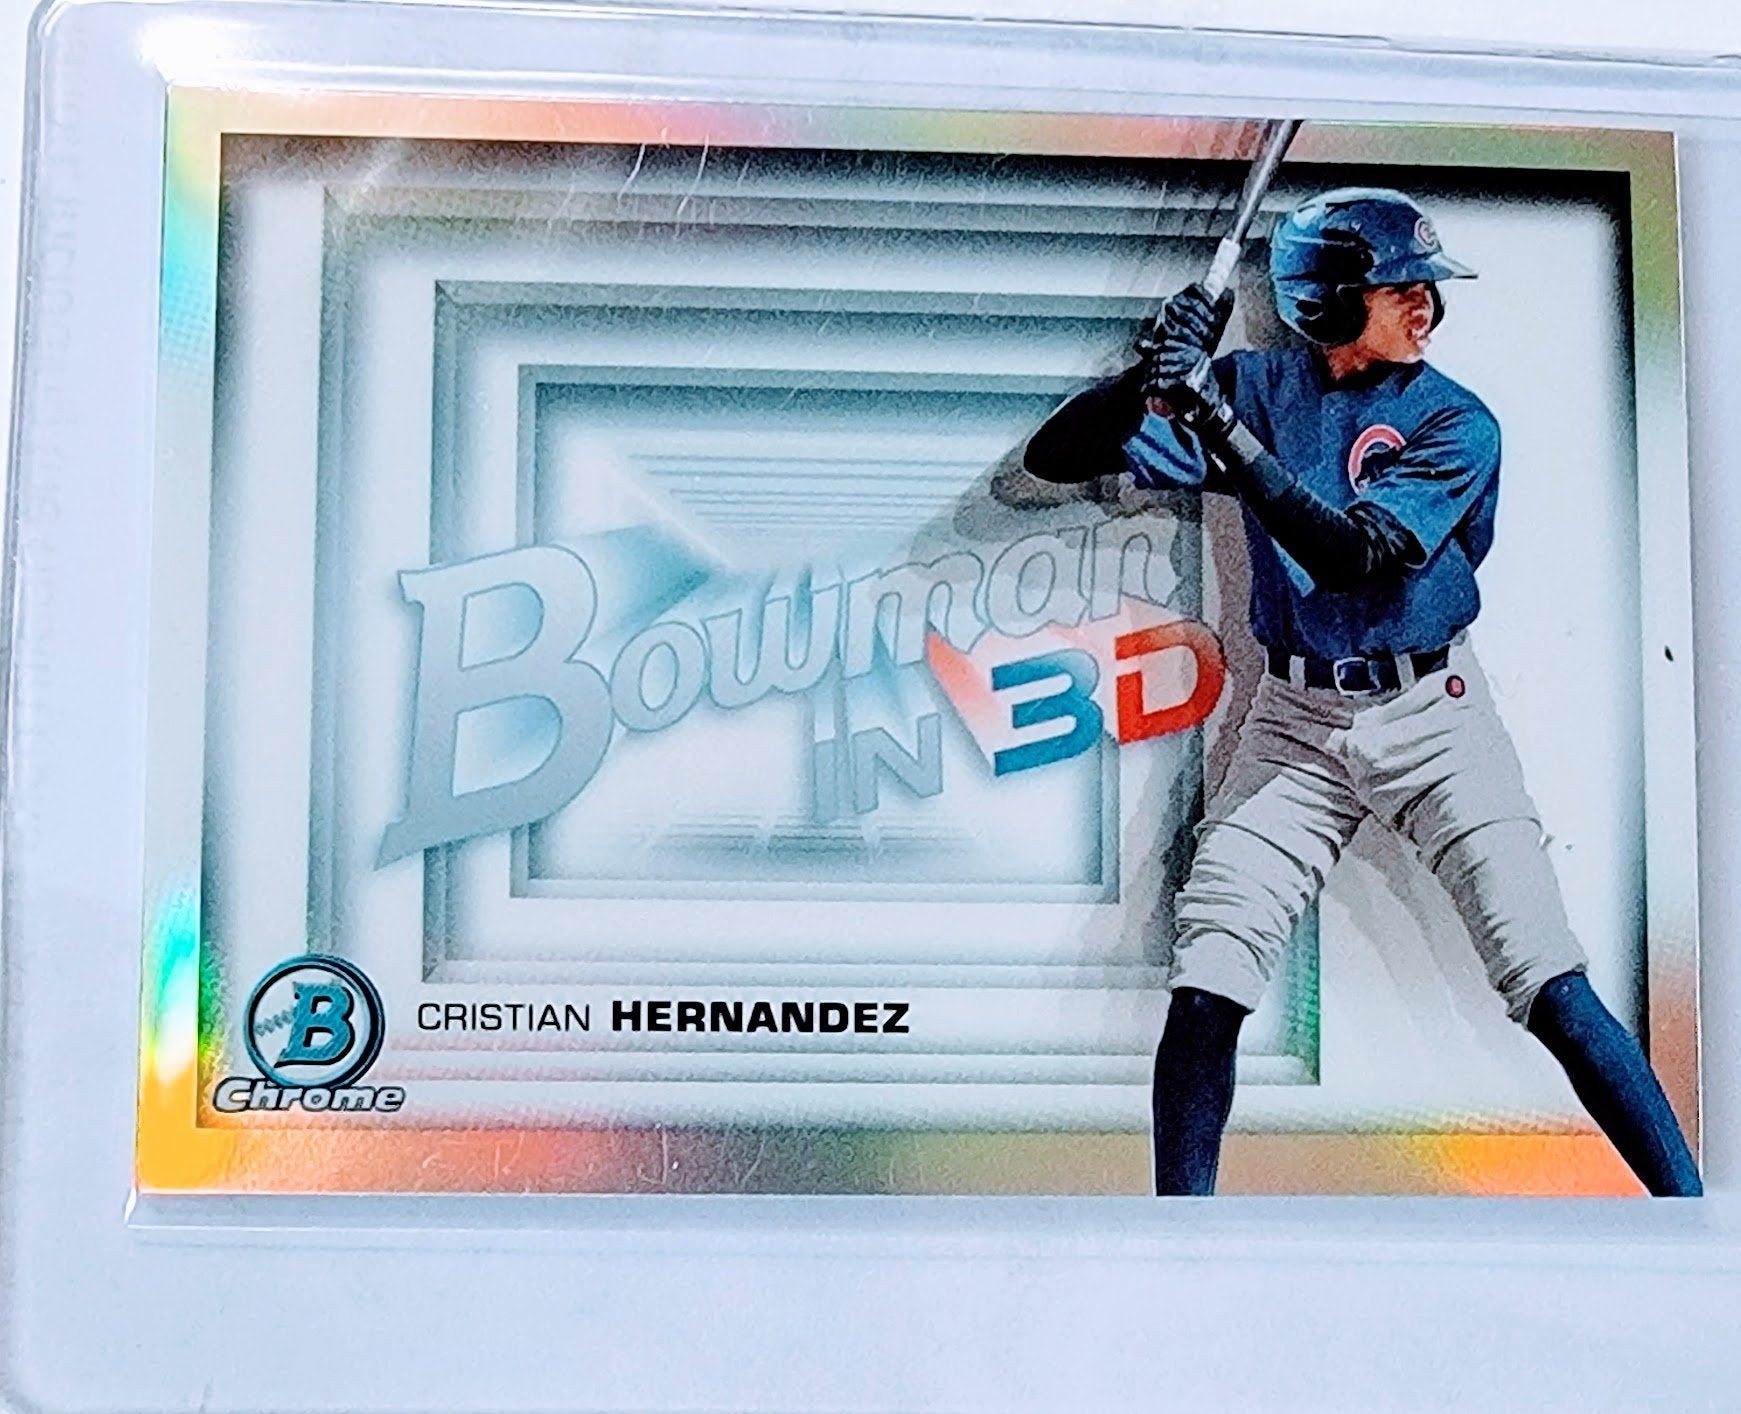 2022 Bowman Chrome Cristian Hernandez Refractor In 3D Refractor Baseball Trading Card GRB1 simple Xclusive Collectibles   